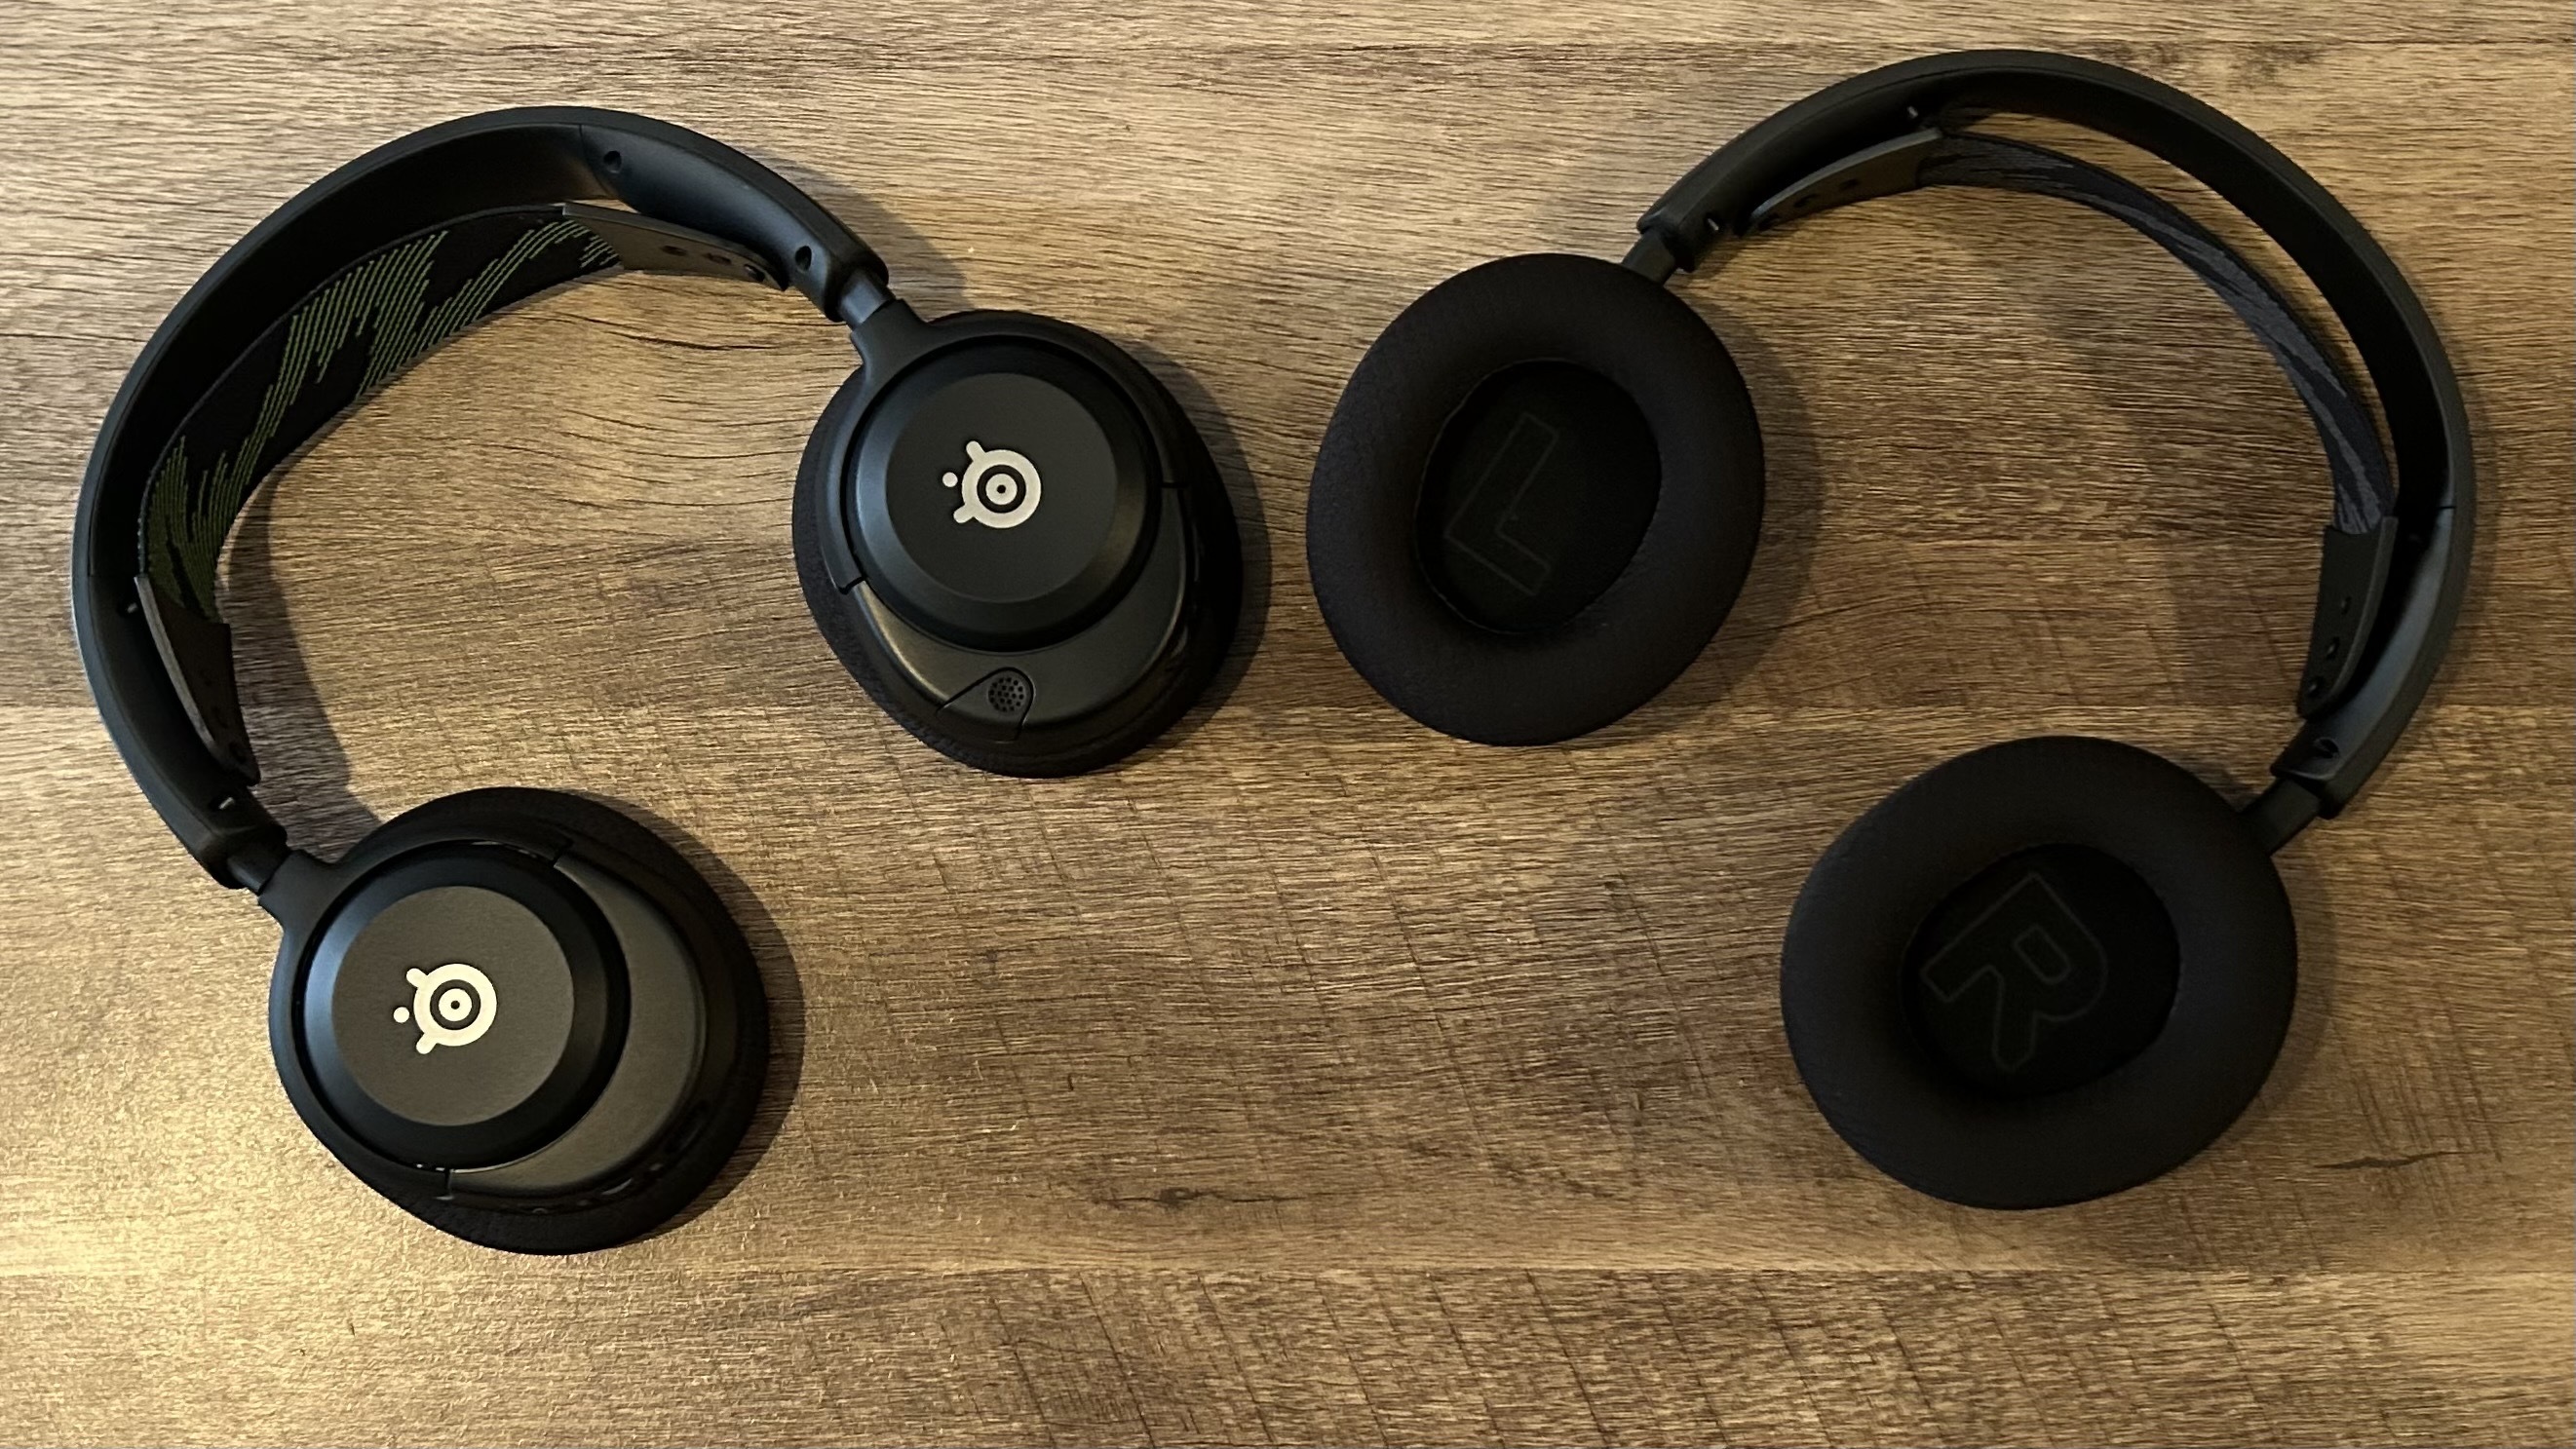 SteelSeries Arctis 1 4-in-1 Wireless Headset Review 